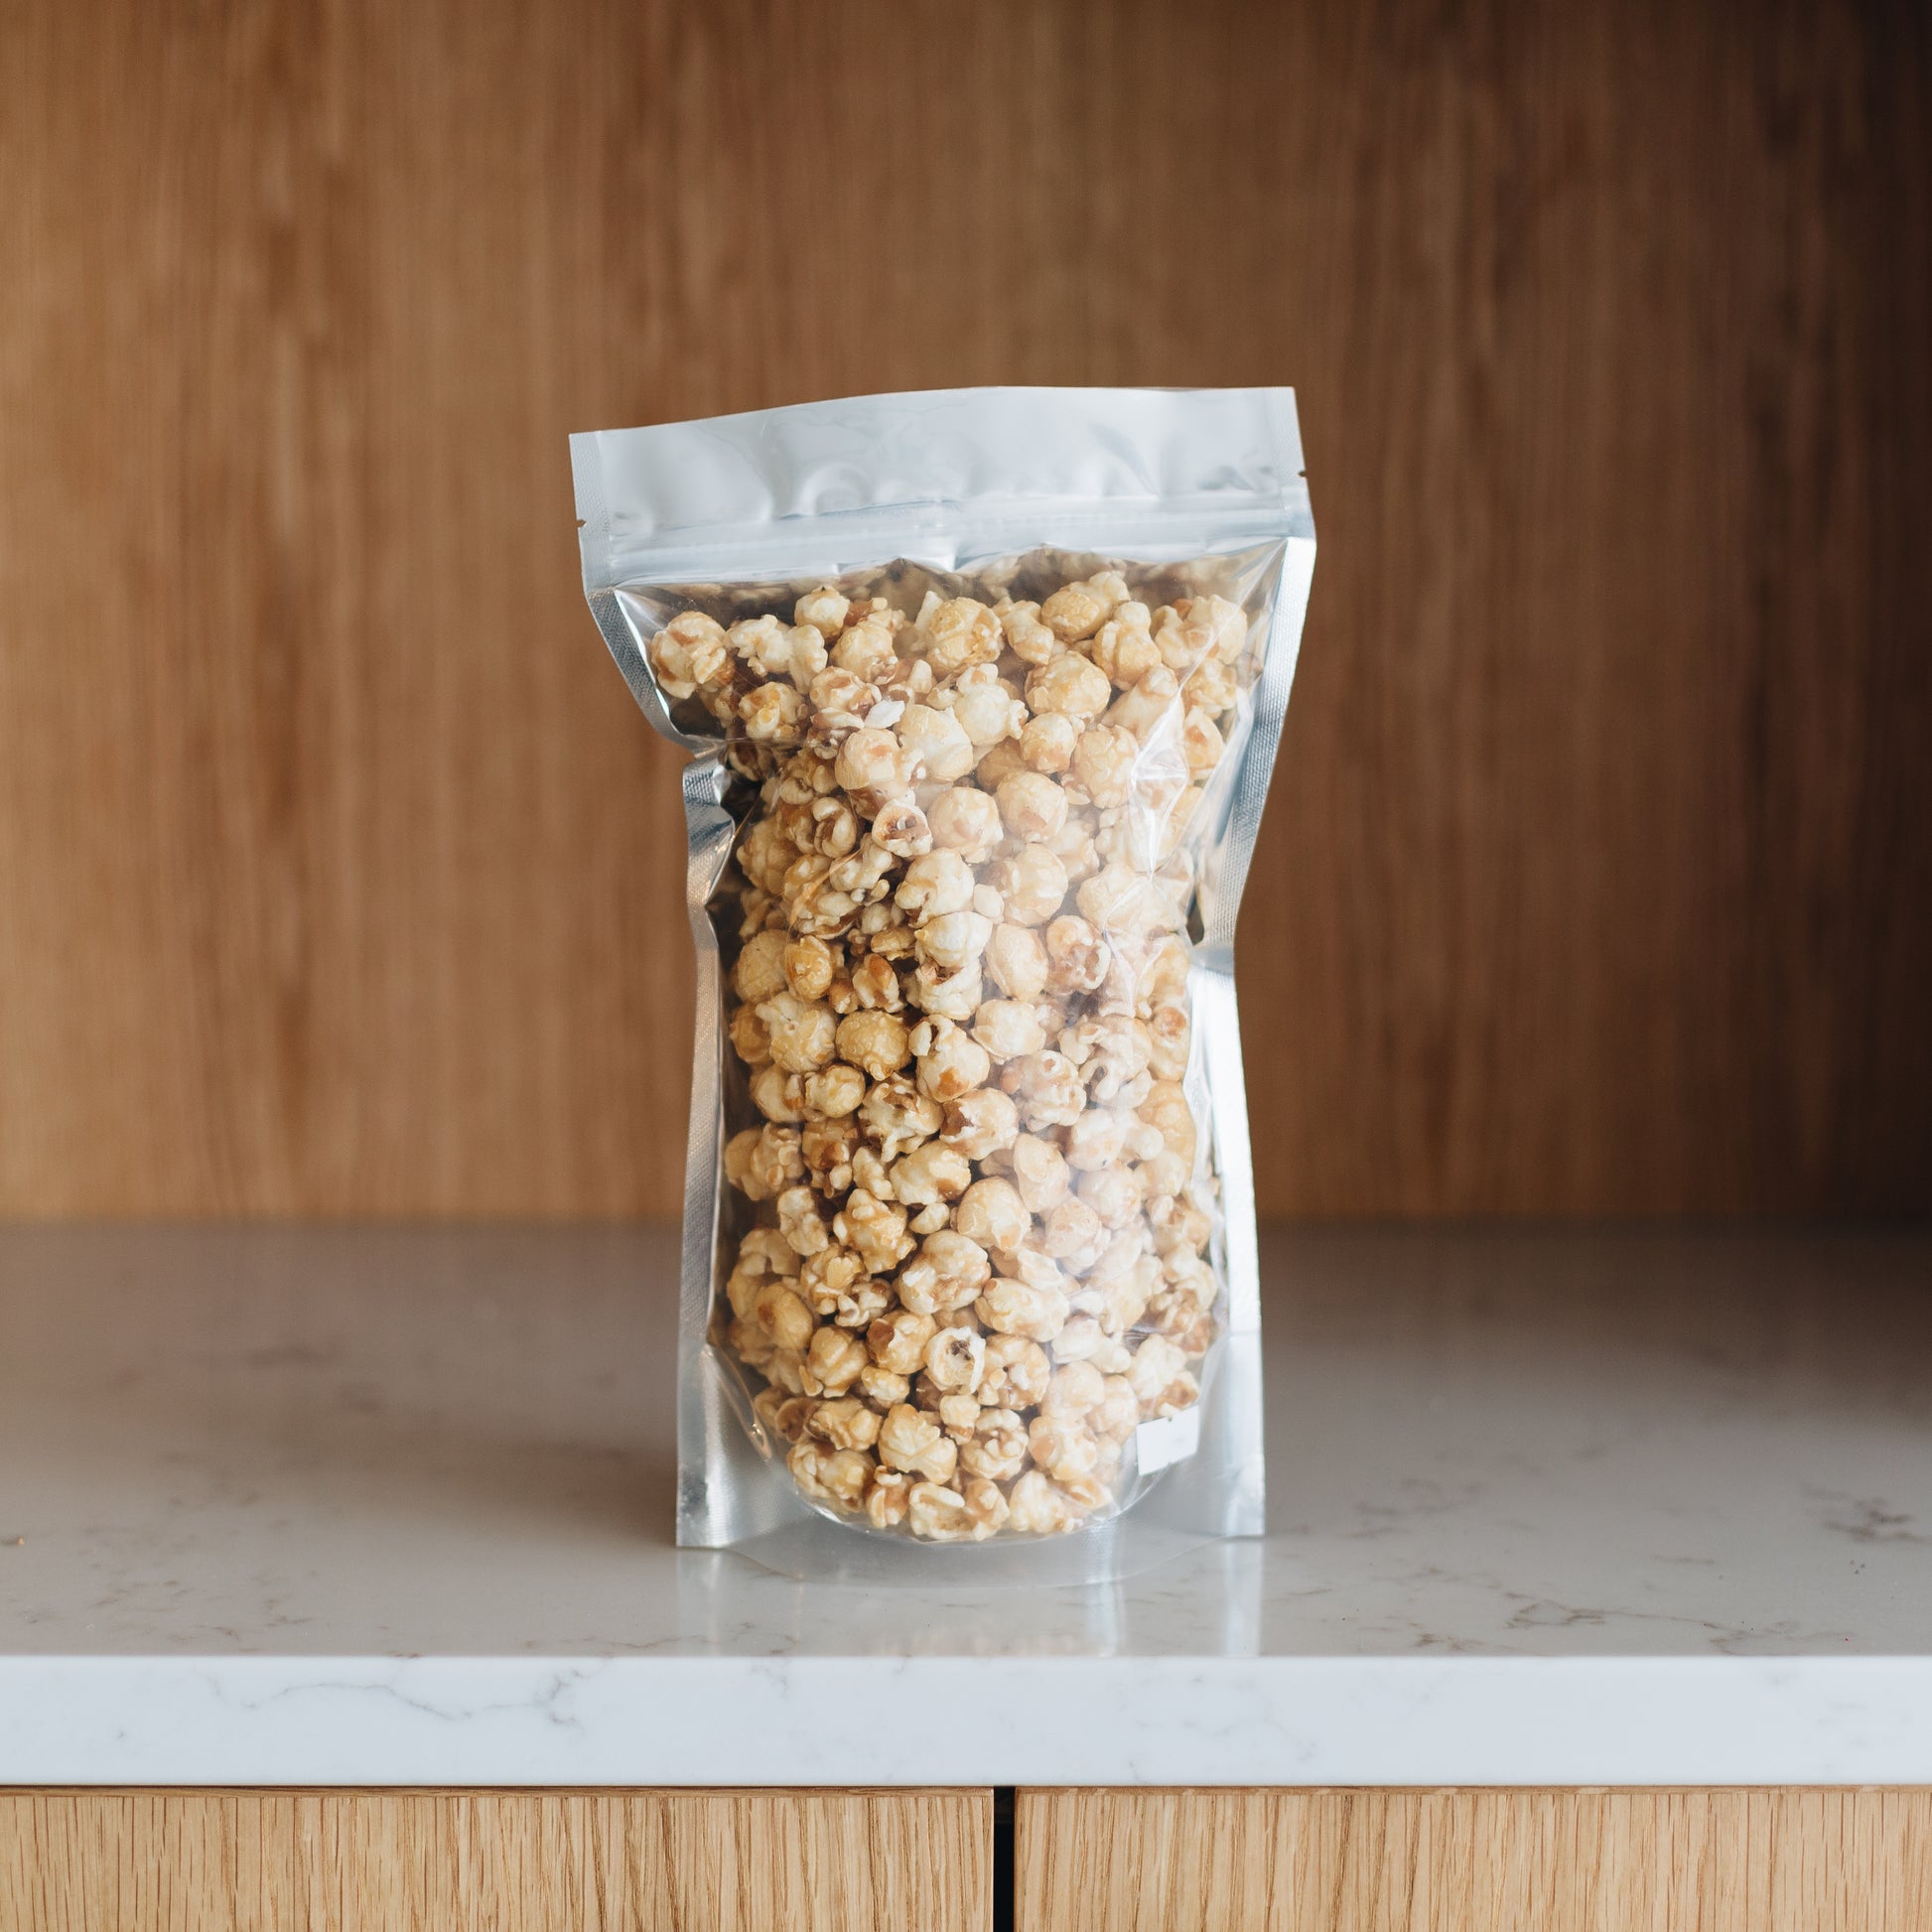 Sweet, Crunchy, and buttery caramel popcorn is the perfect snack to have around the house. Order it now online or stop in our shop to get a bag of this classic gourmet popcorn. Featured is our Large Caramel Popcorn (8oz)